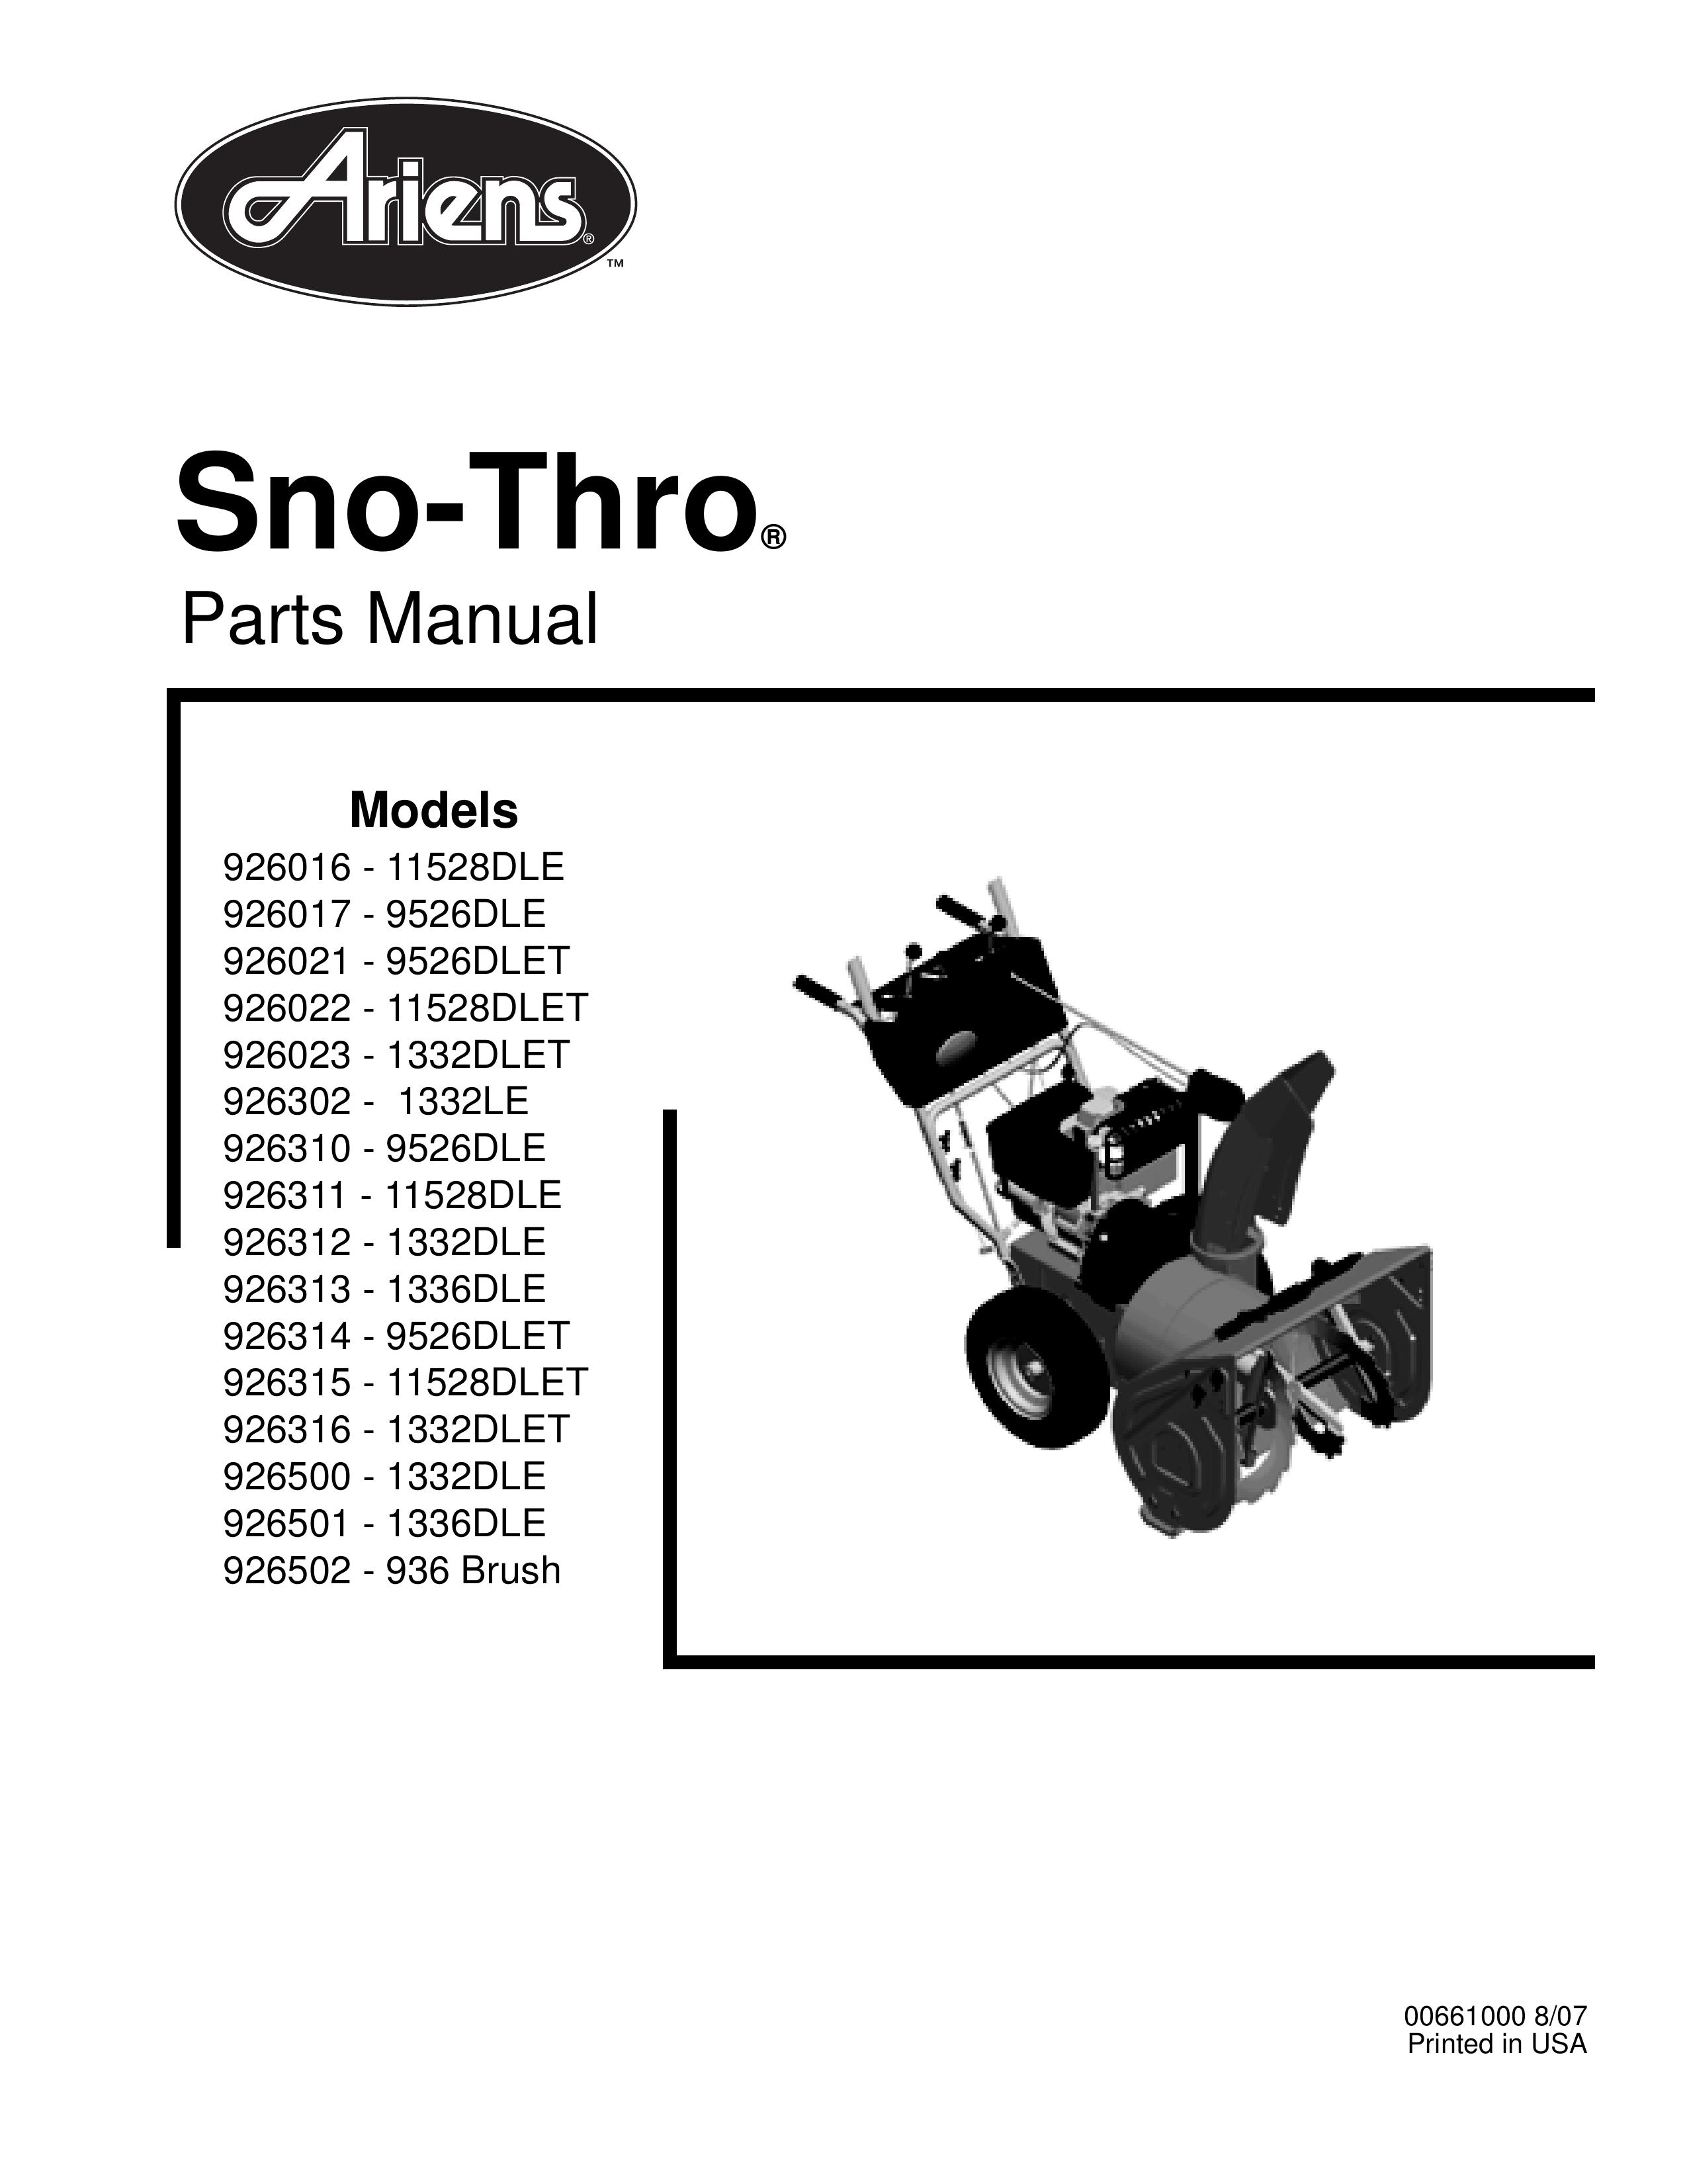 Ariens 926312 - 1332DLE Snow Blower Attachment User Manual